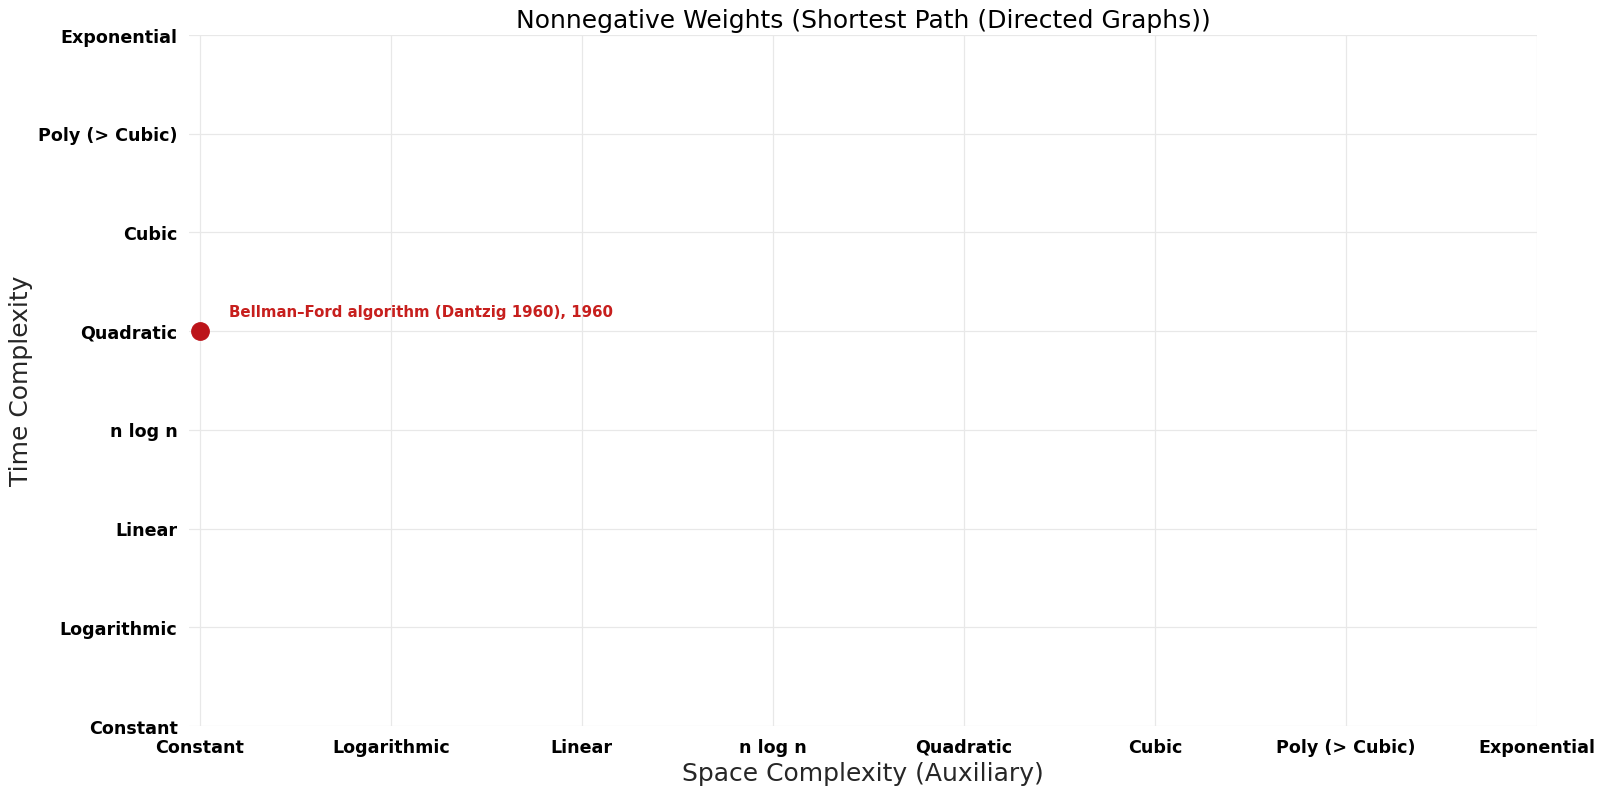 Shortest Path (Directed Graphs) - Nonnegative Weights - Pareto Frontier.png